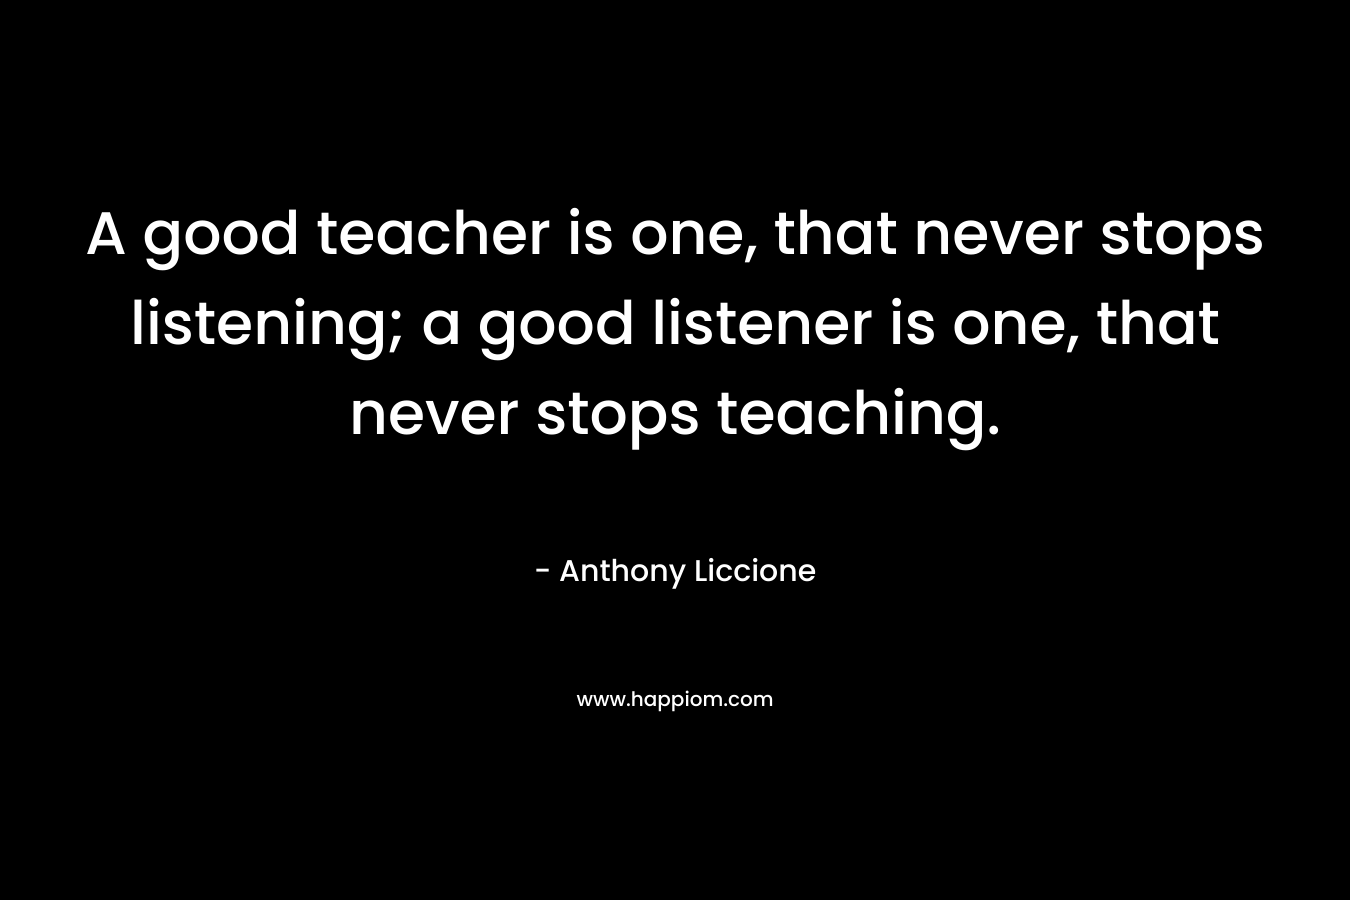 A good teacher is one, that never stops listening; a good listener is one, that never stops teaching. – Anthony Liccione